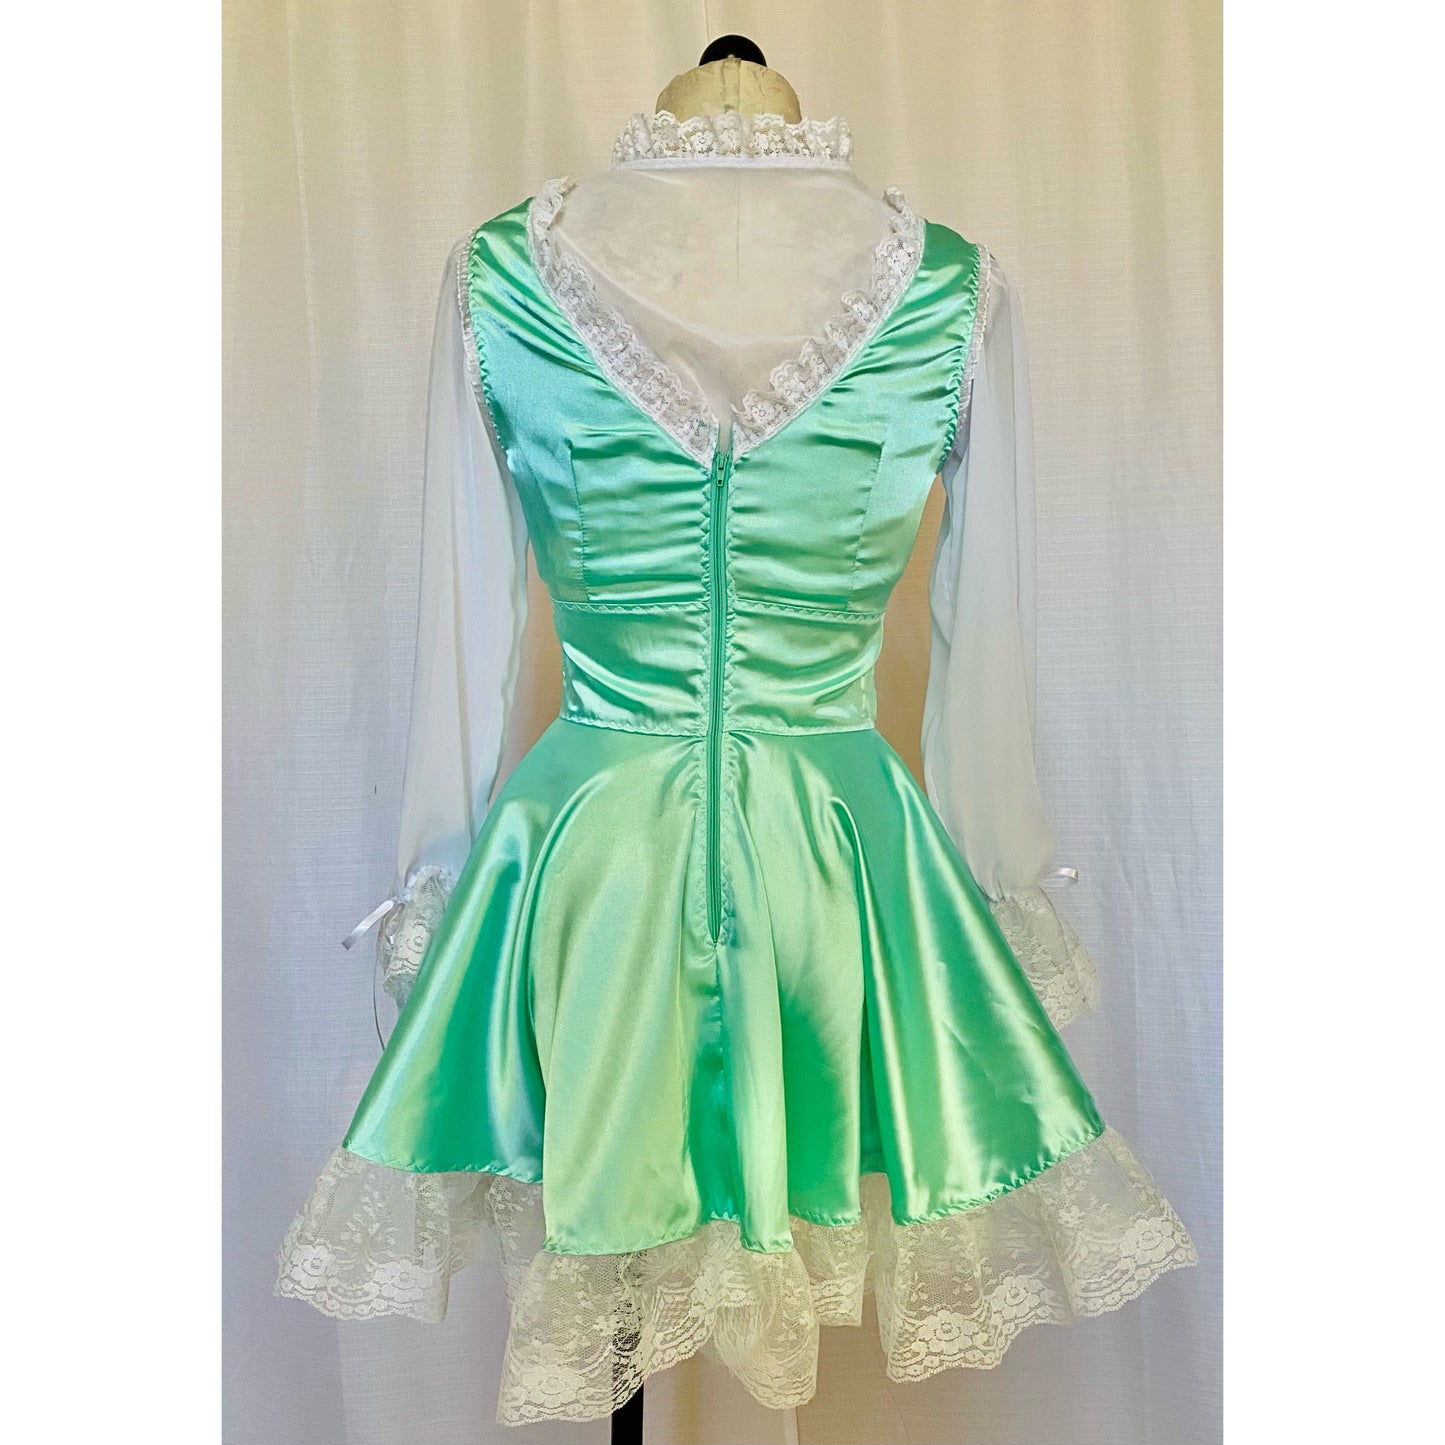 The Siouxsie Dress in Mint